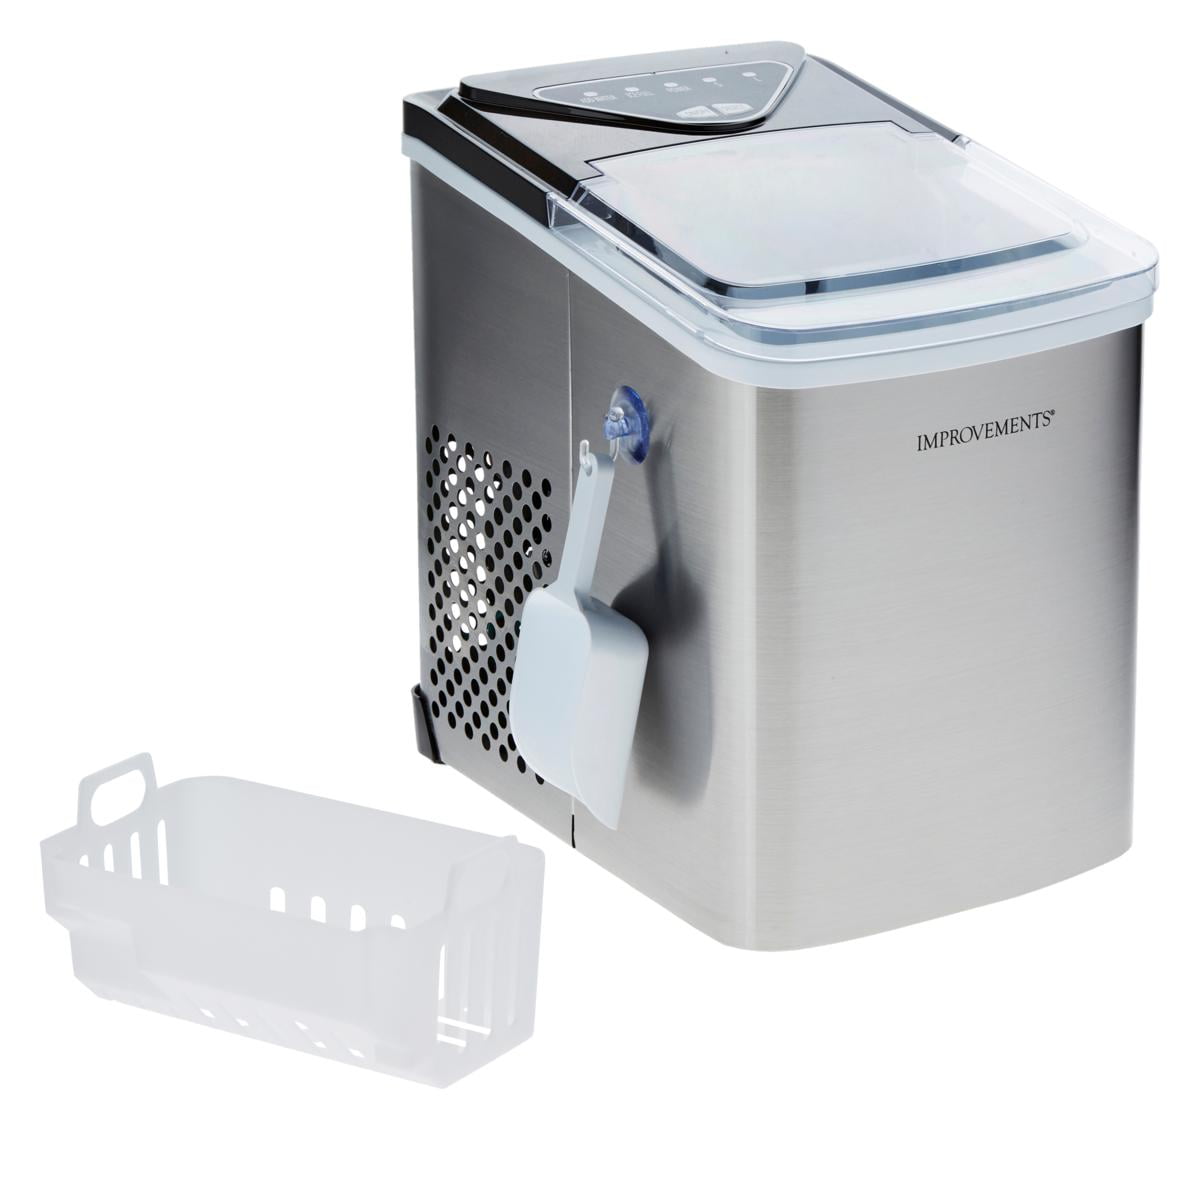 Improvements 26 lb. Portable Compact Ice Maker with Handle - 20648379